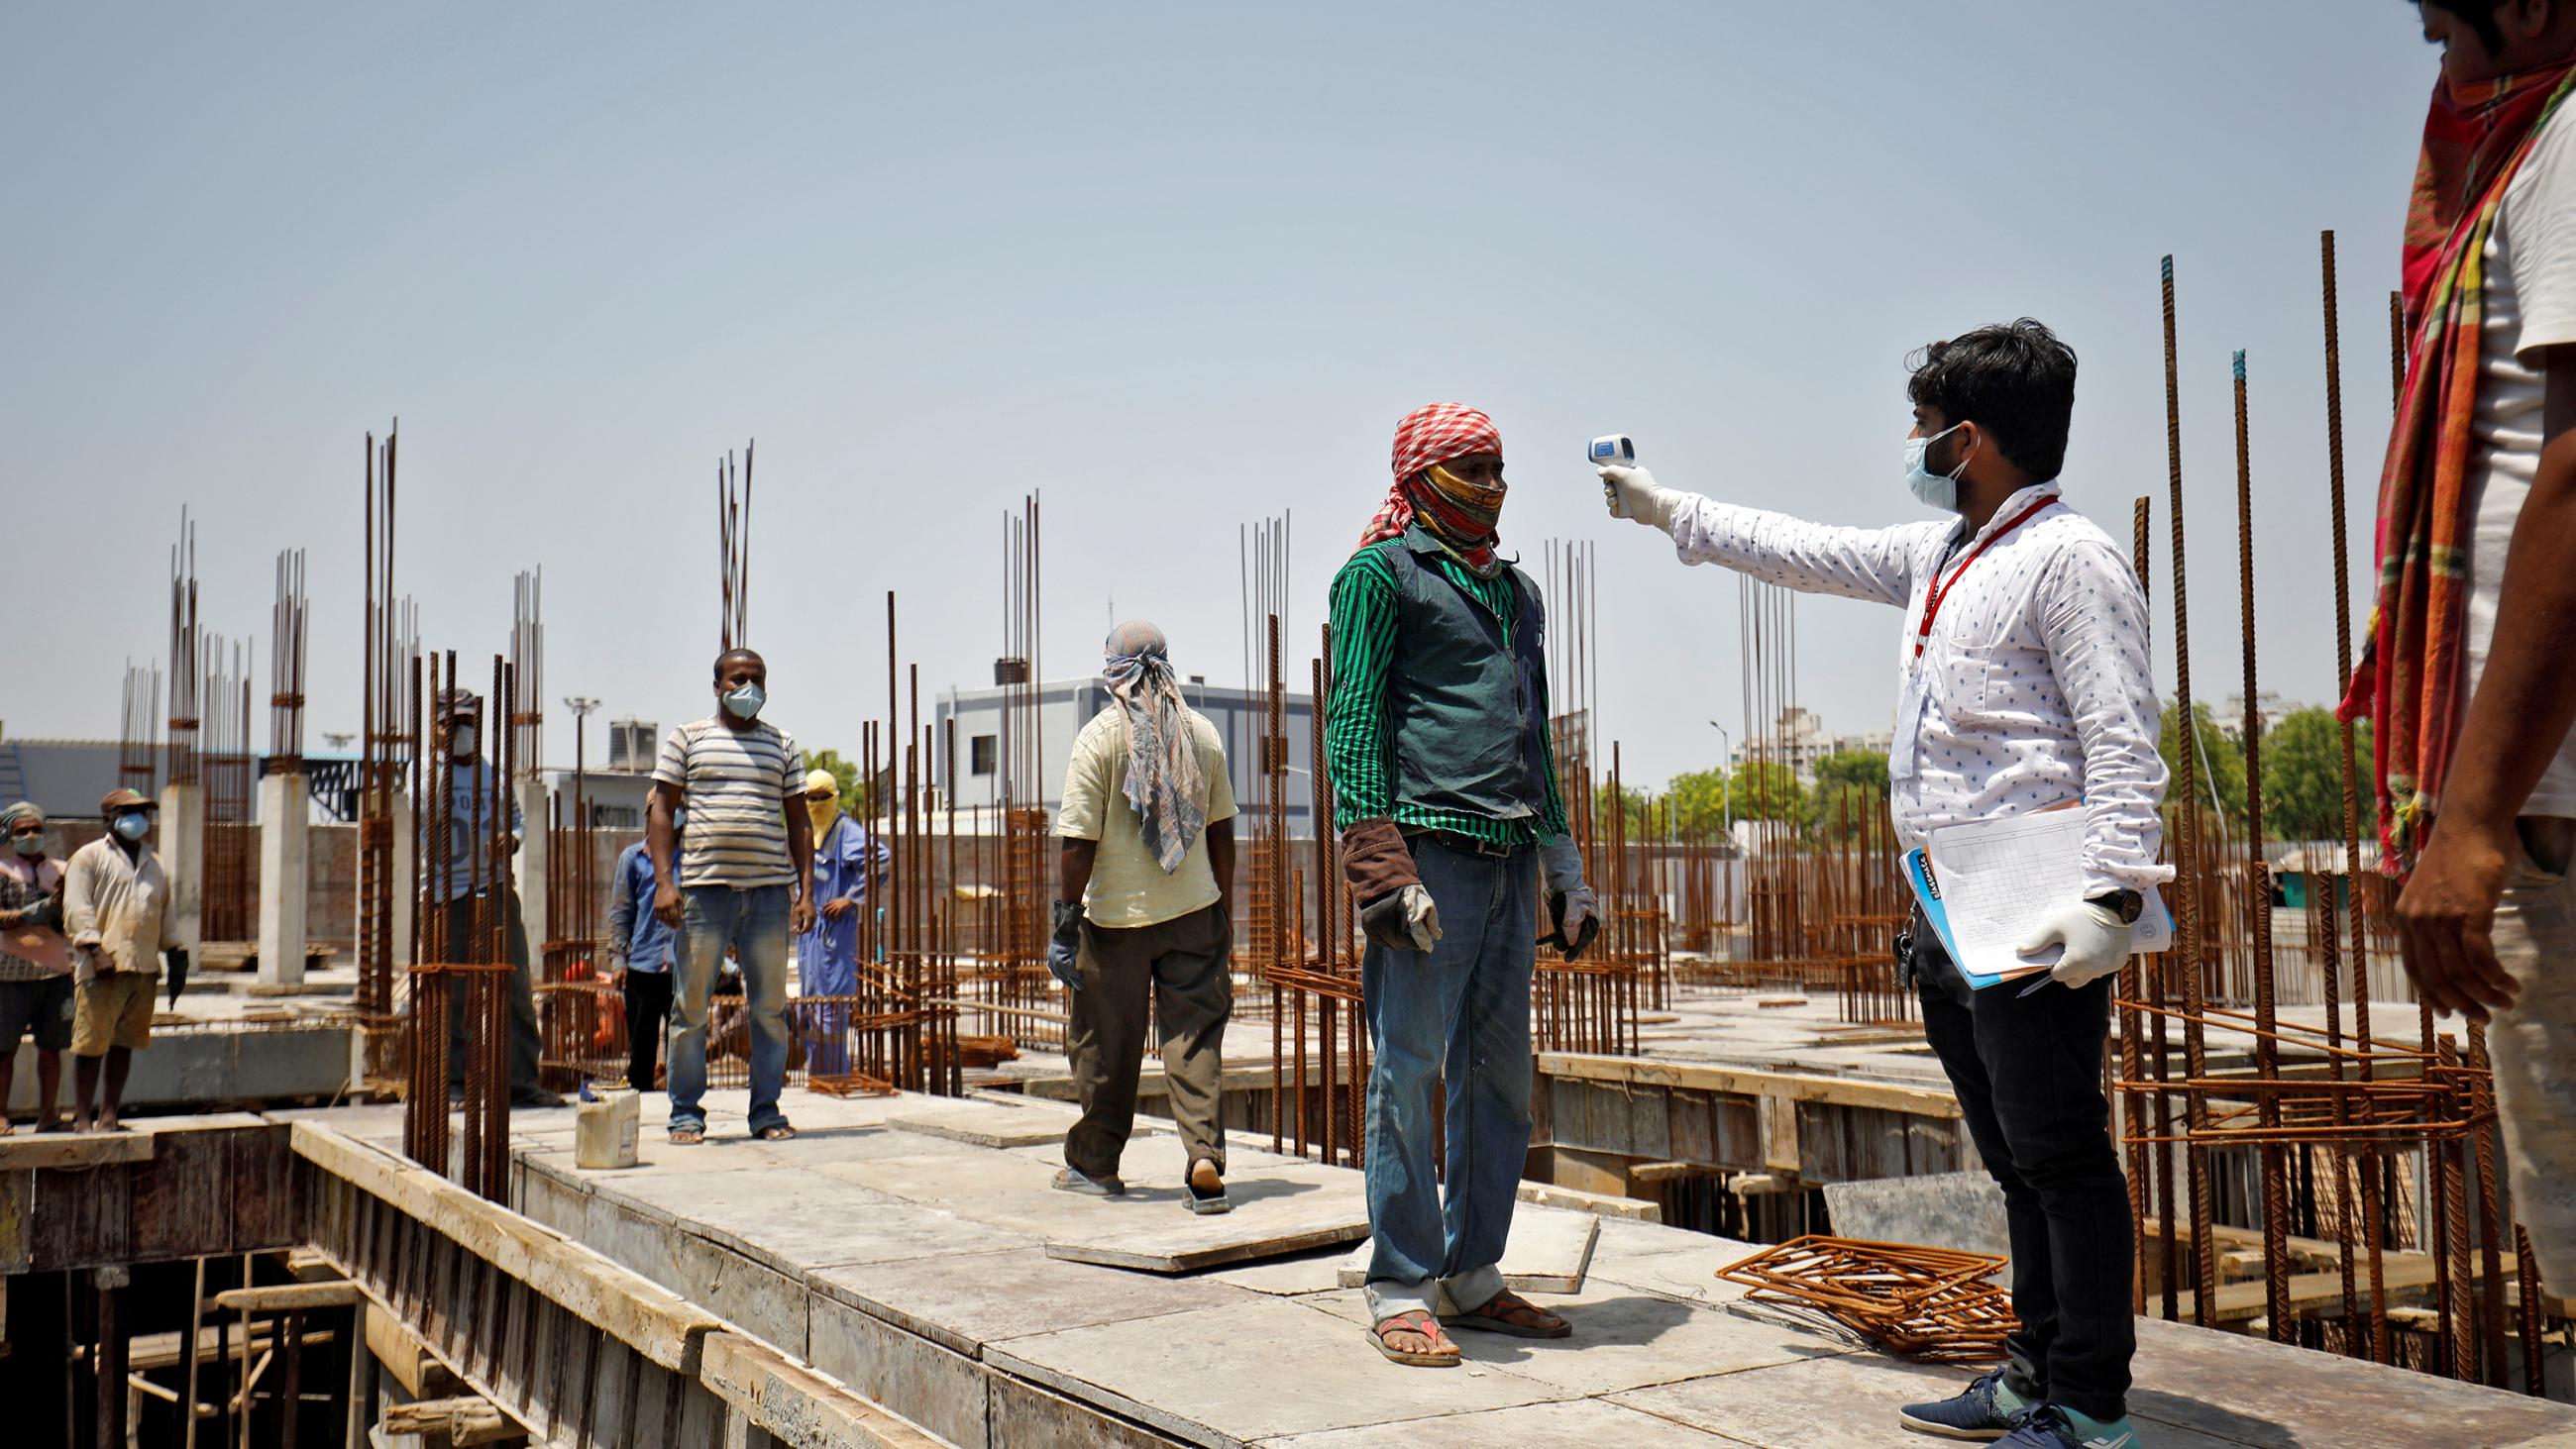 The photo shows the health worker aiming a temperature sensor at the forehead of a construction worker on site at a dig.